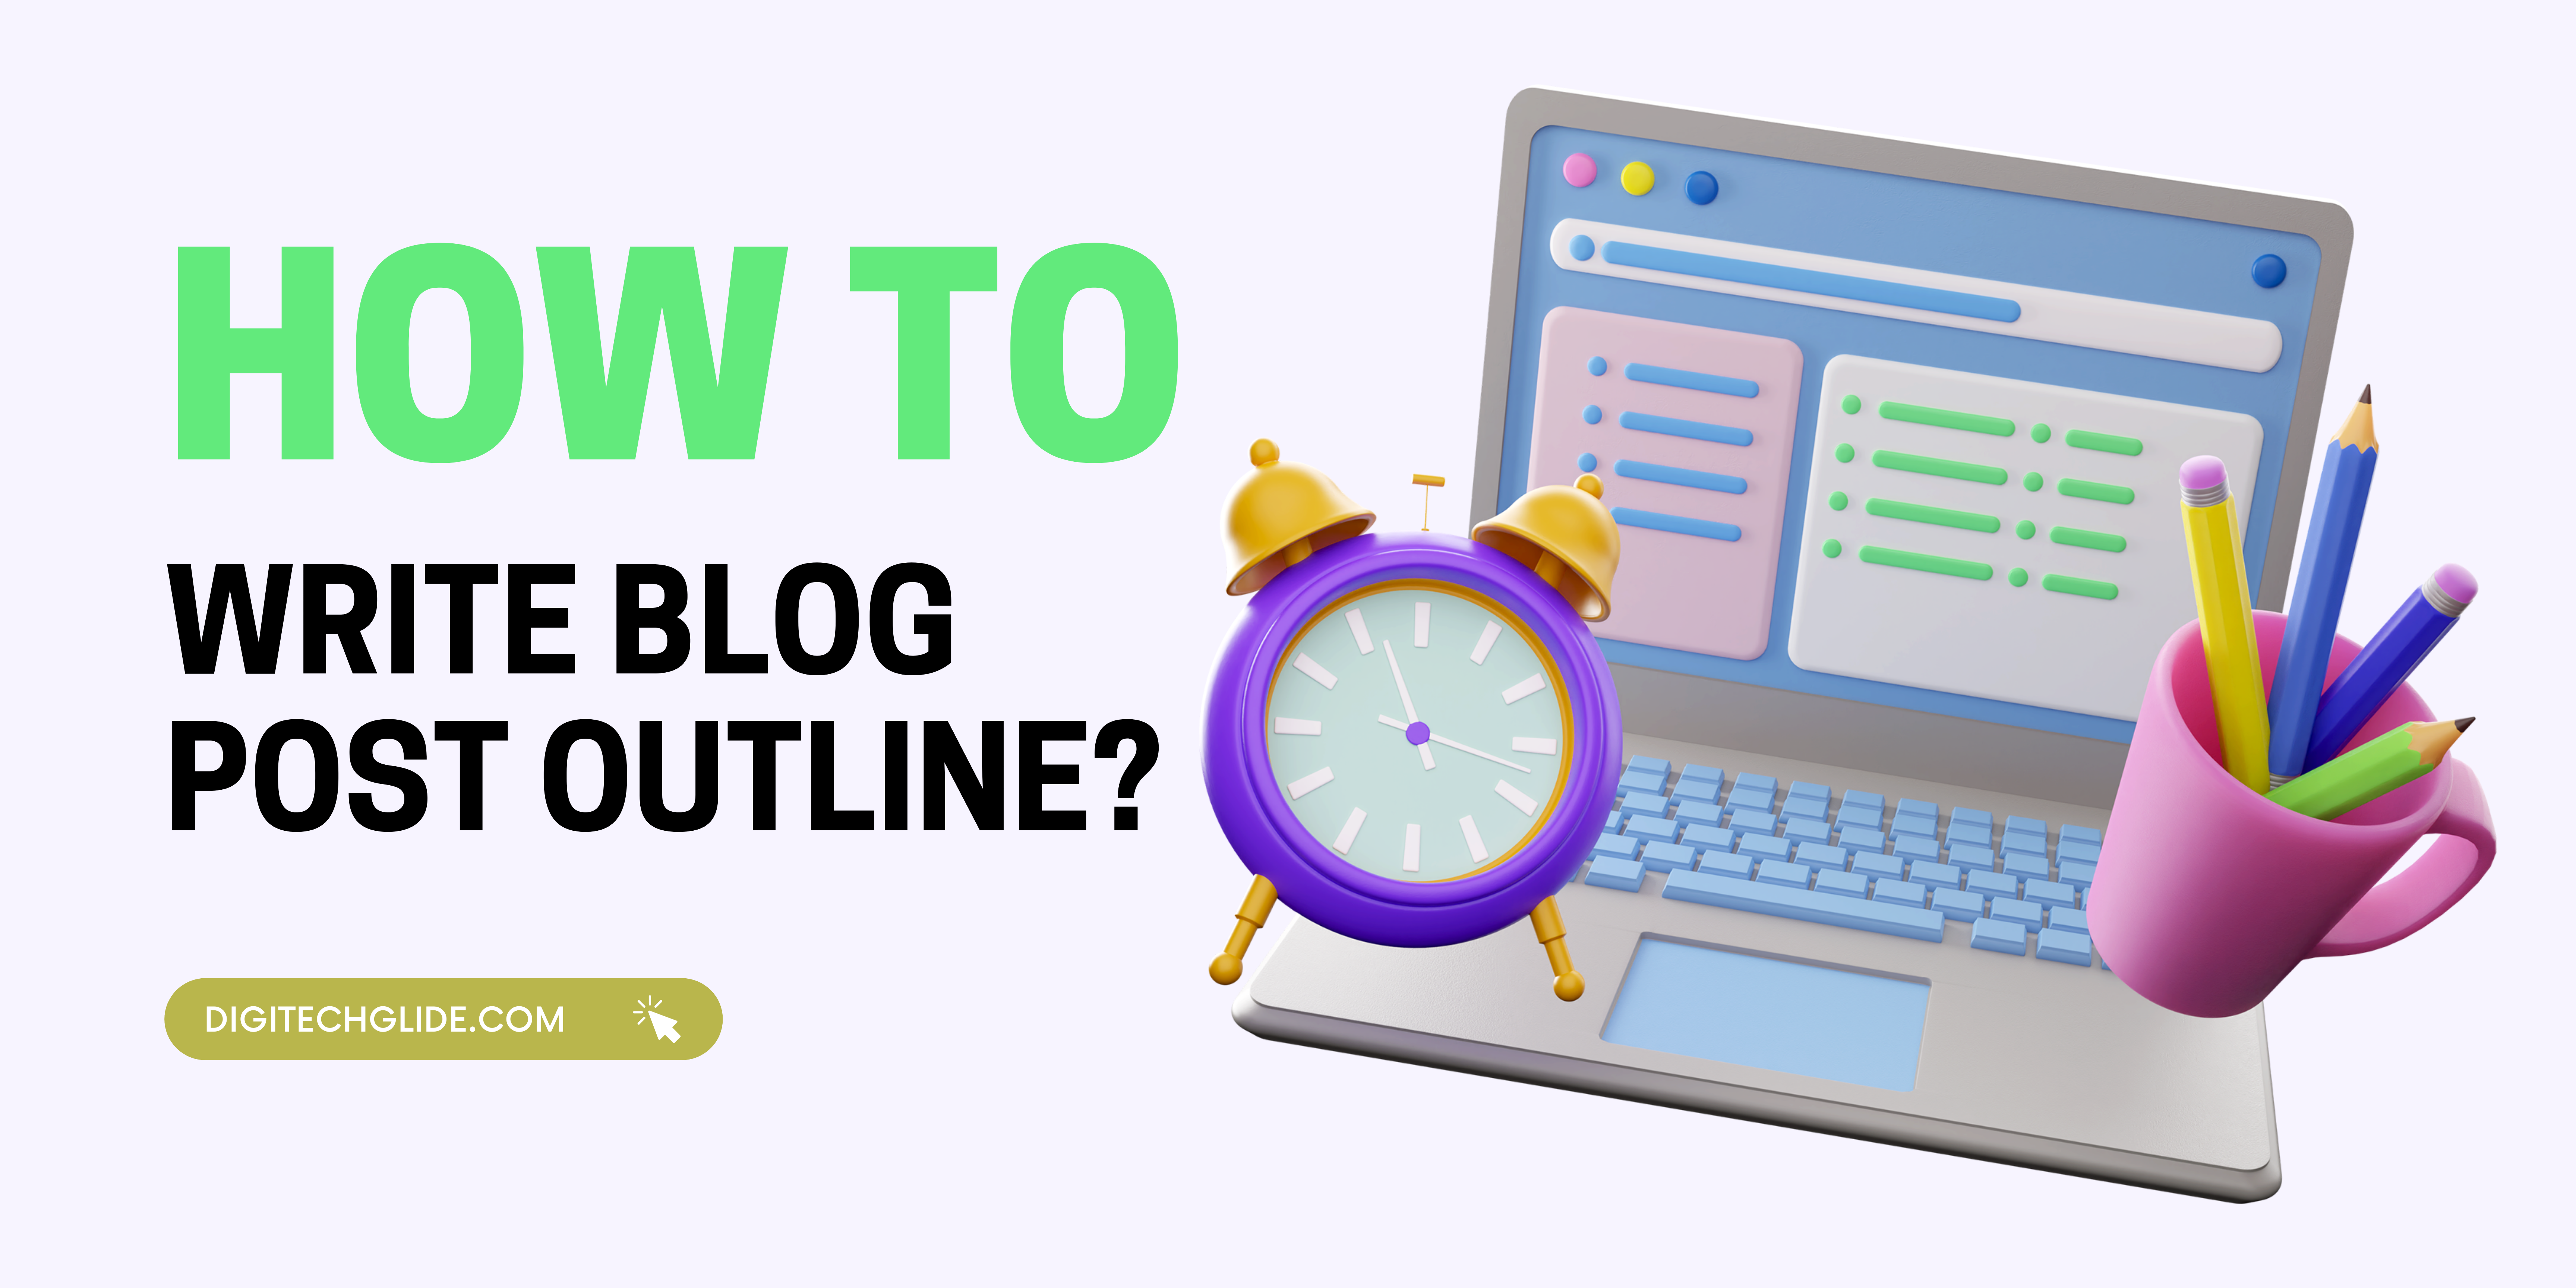 How to write blog post outline